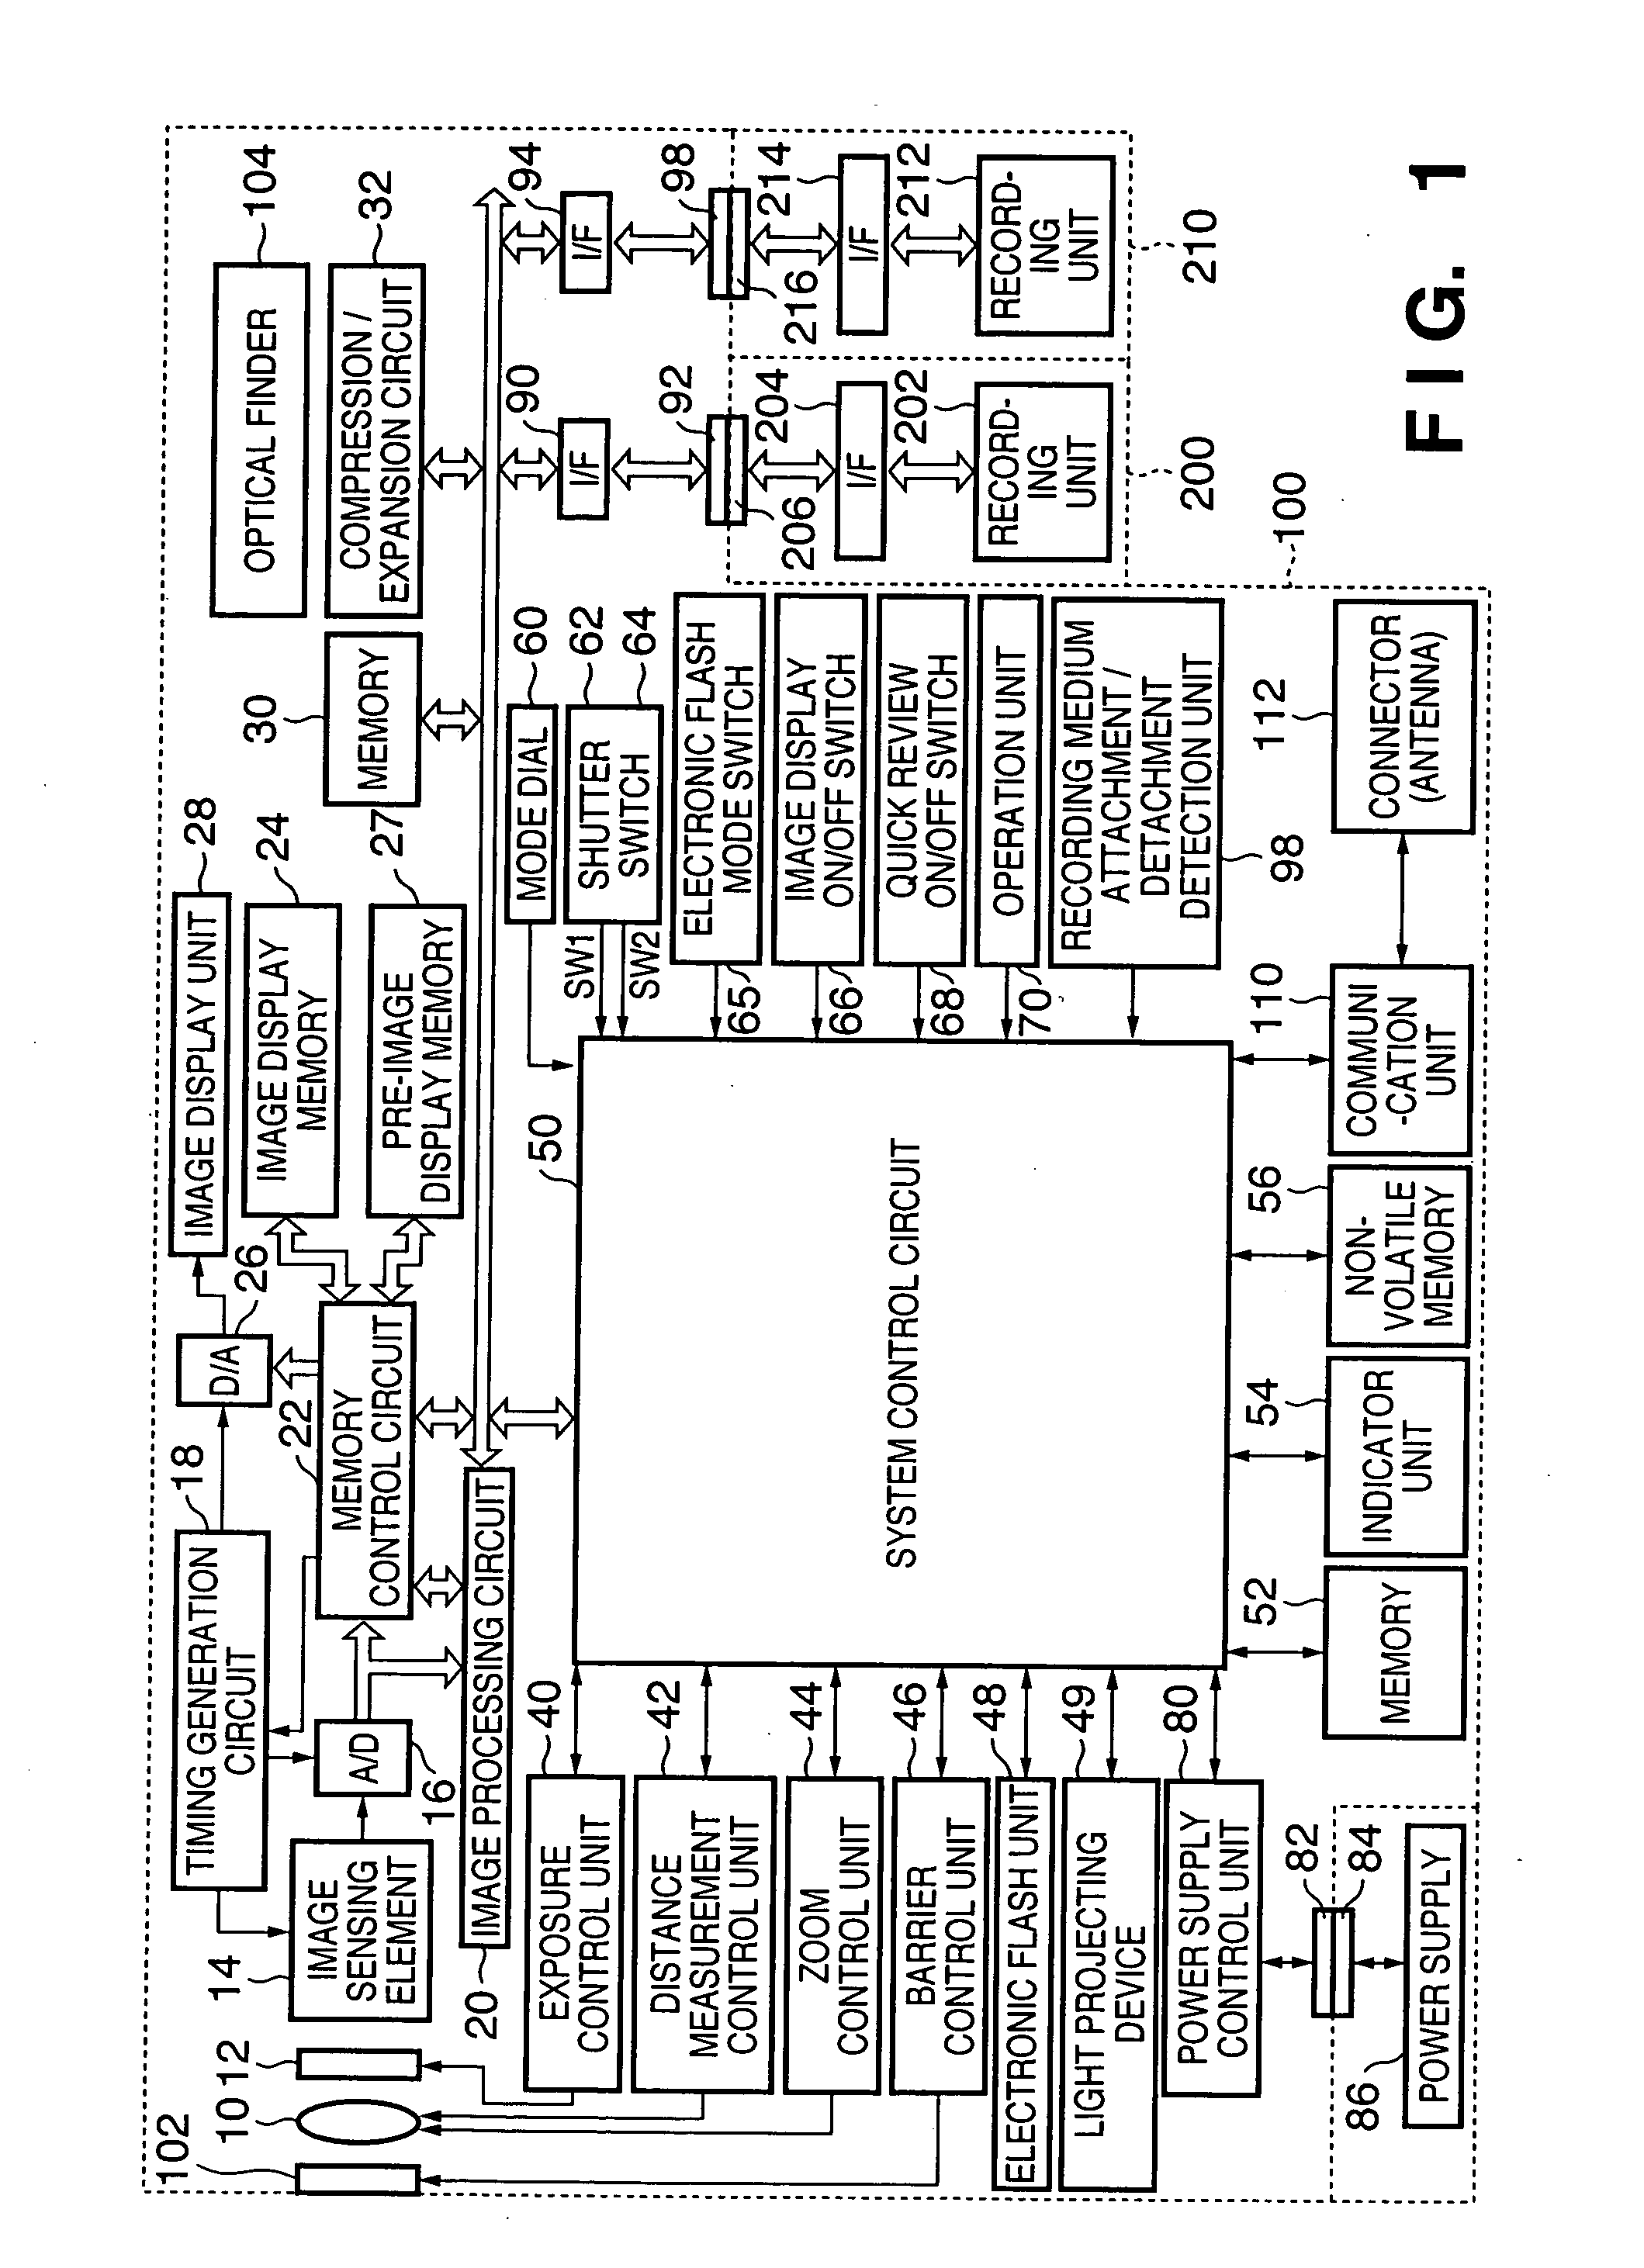 Image sensing apparatus, image processing apparatus, and control method therefor